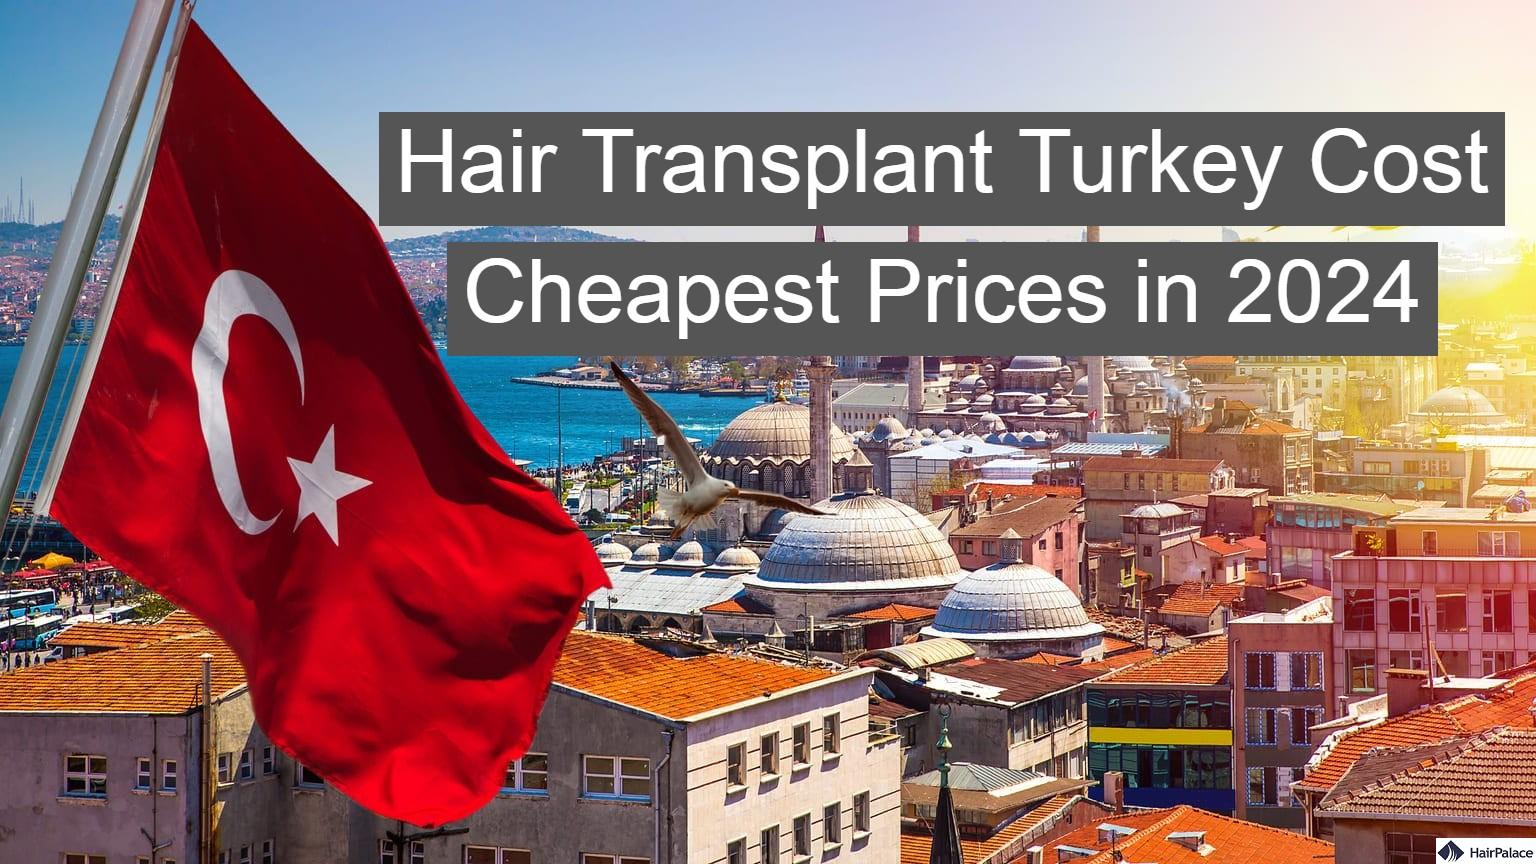 hair transplant turkey cost cheapest prices in 2024